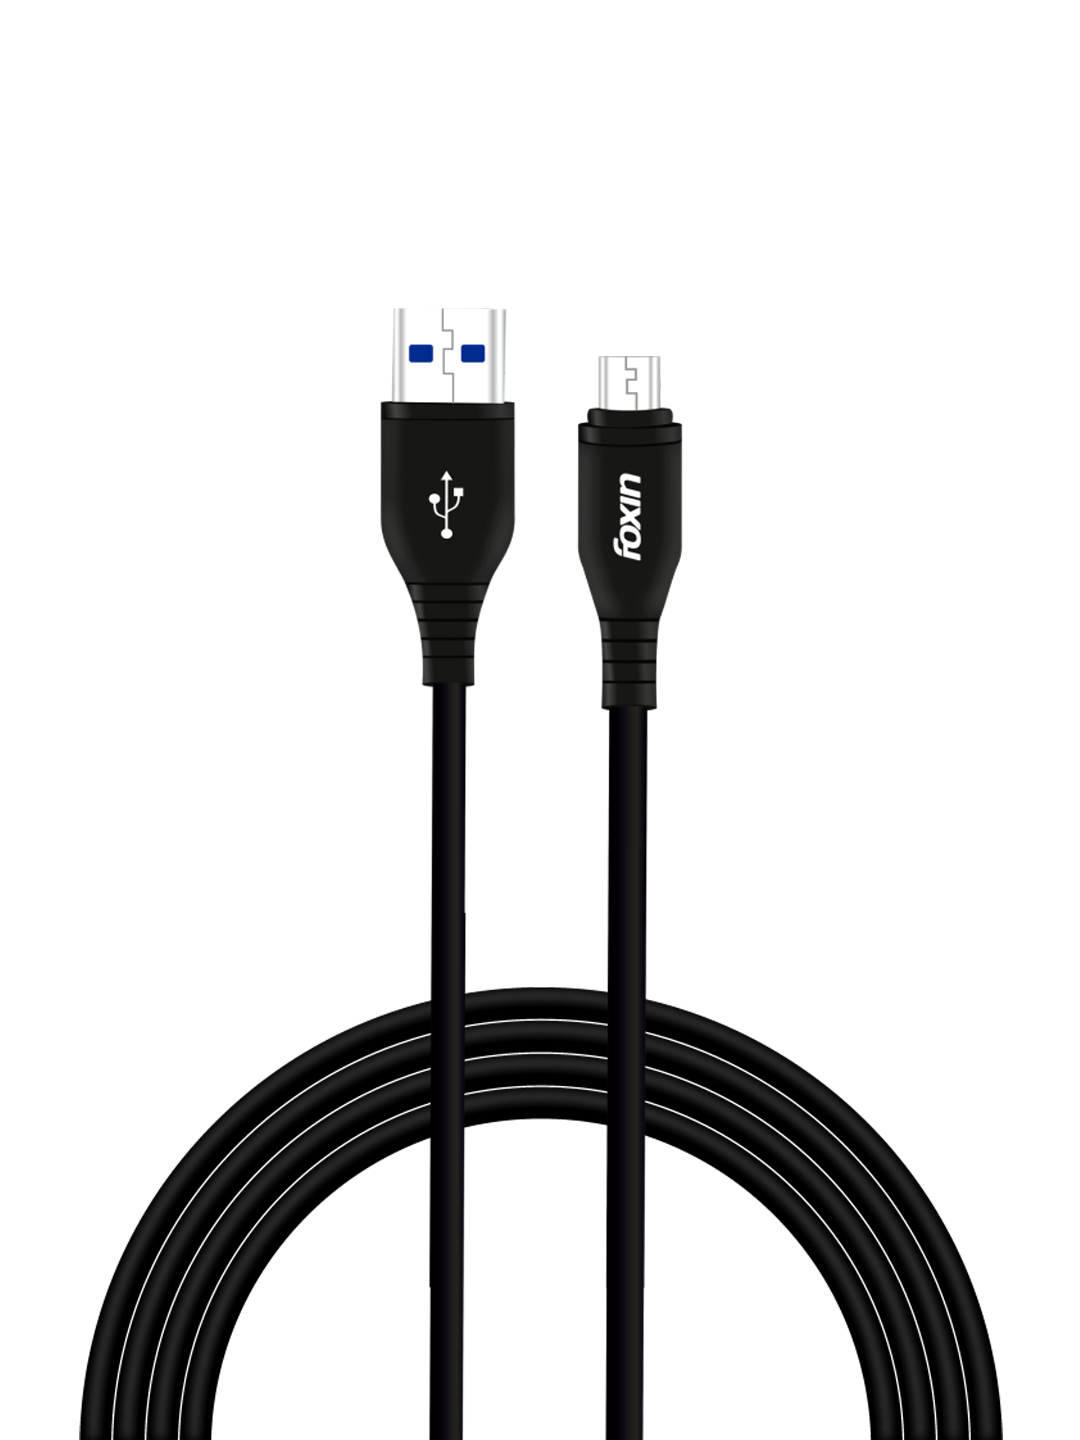 Foxin ME01 Micro USB Power Bank Cable